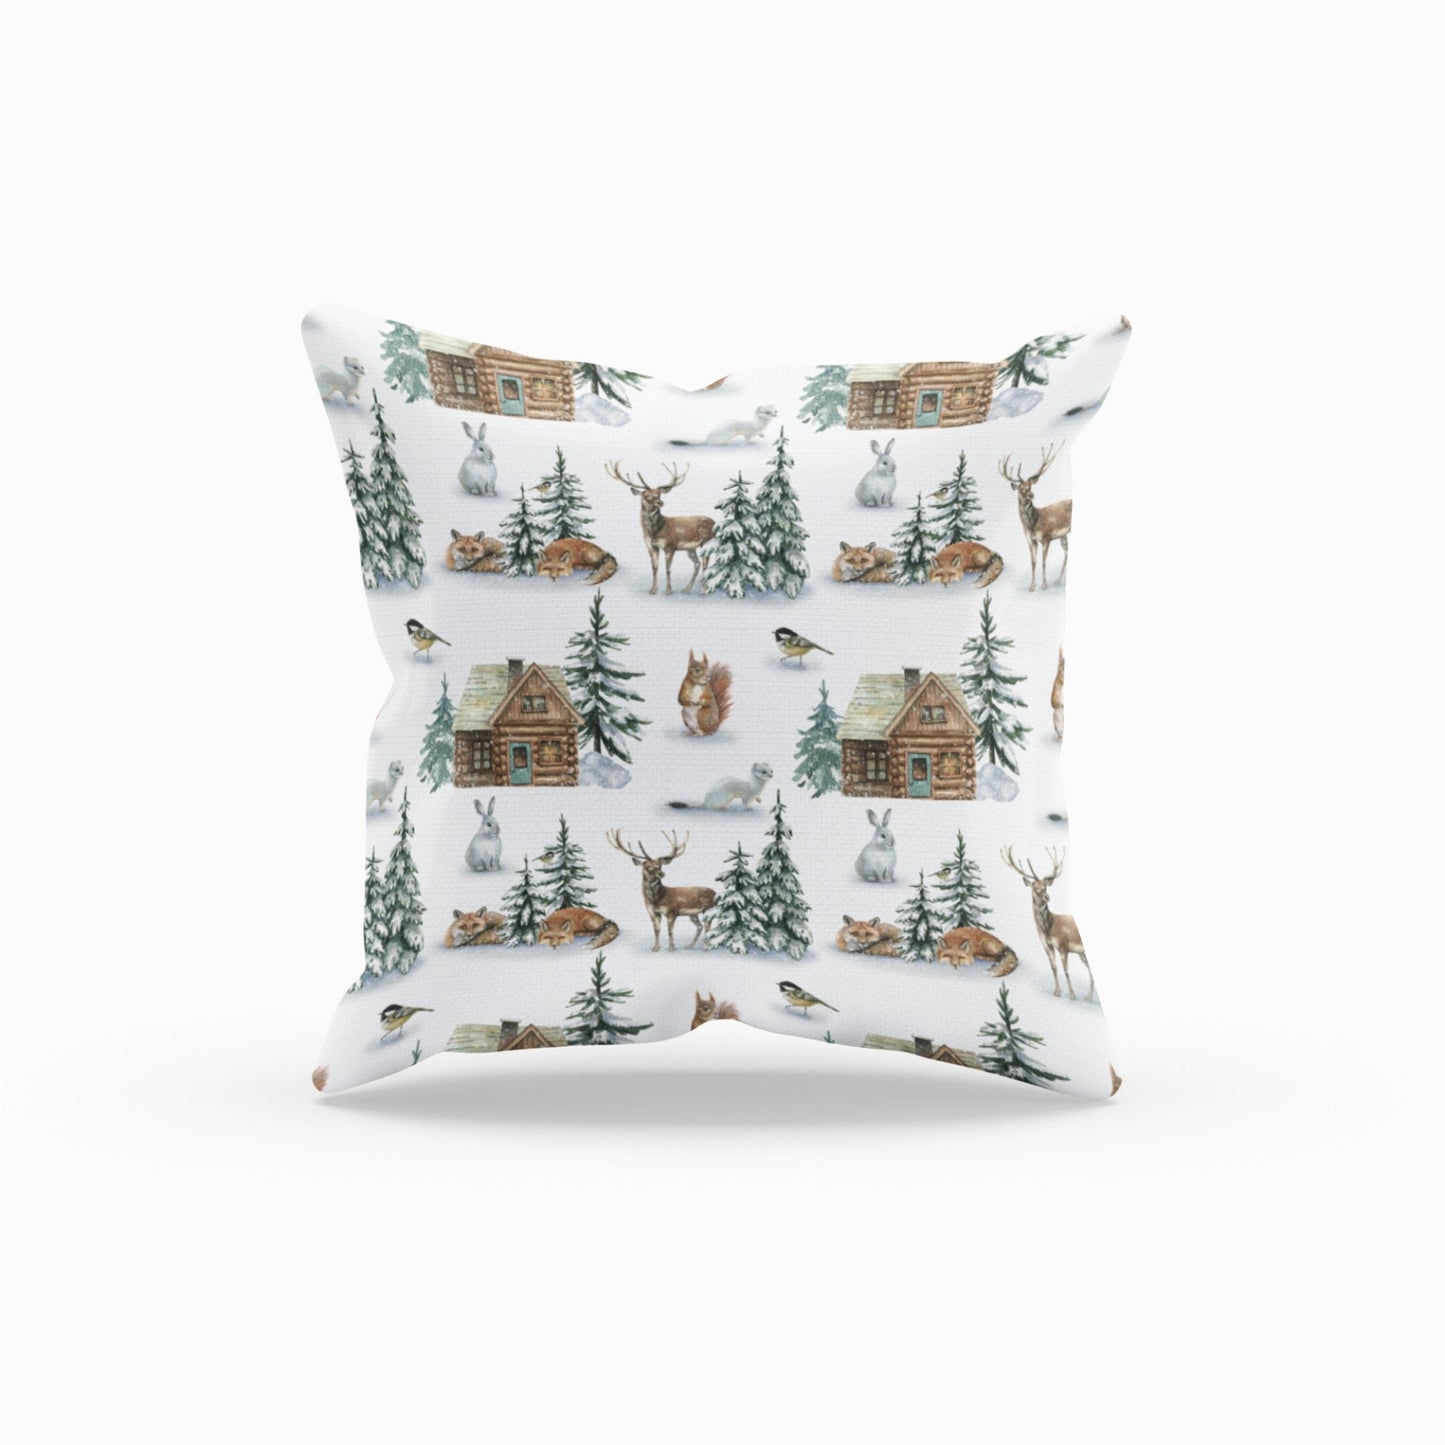 Christmas Decor of Grid House in Nature Throw Pillow Cushion